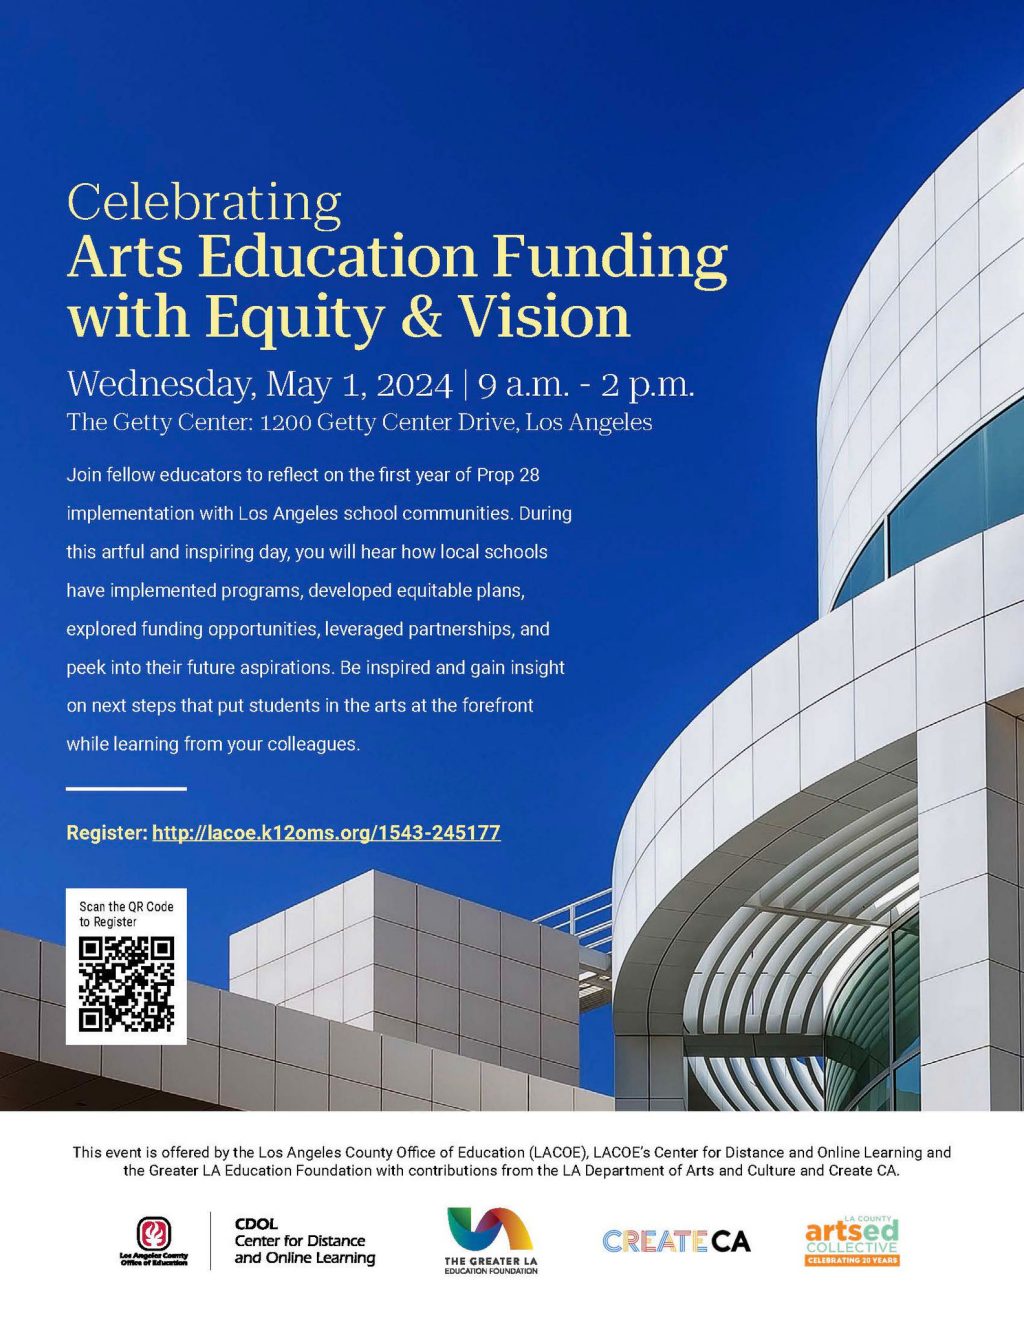 Arts Education Funding Event Flyer